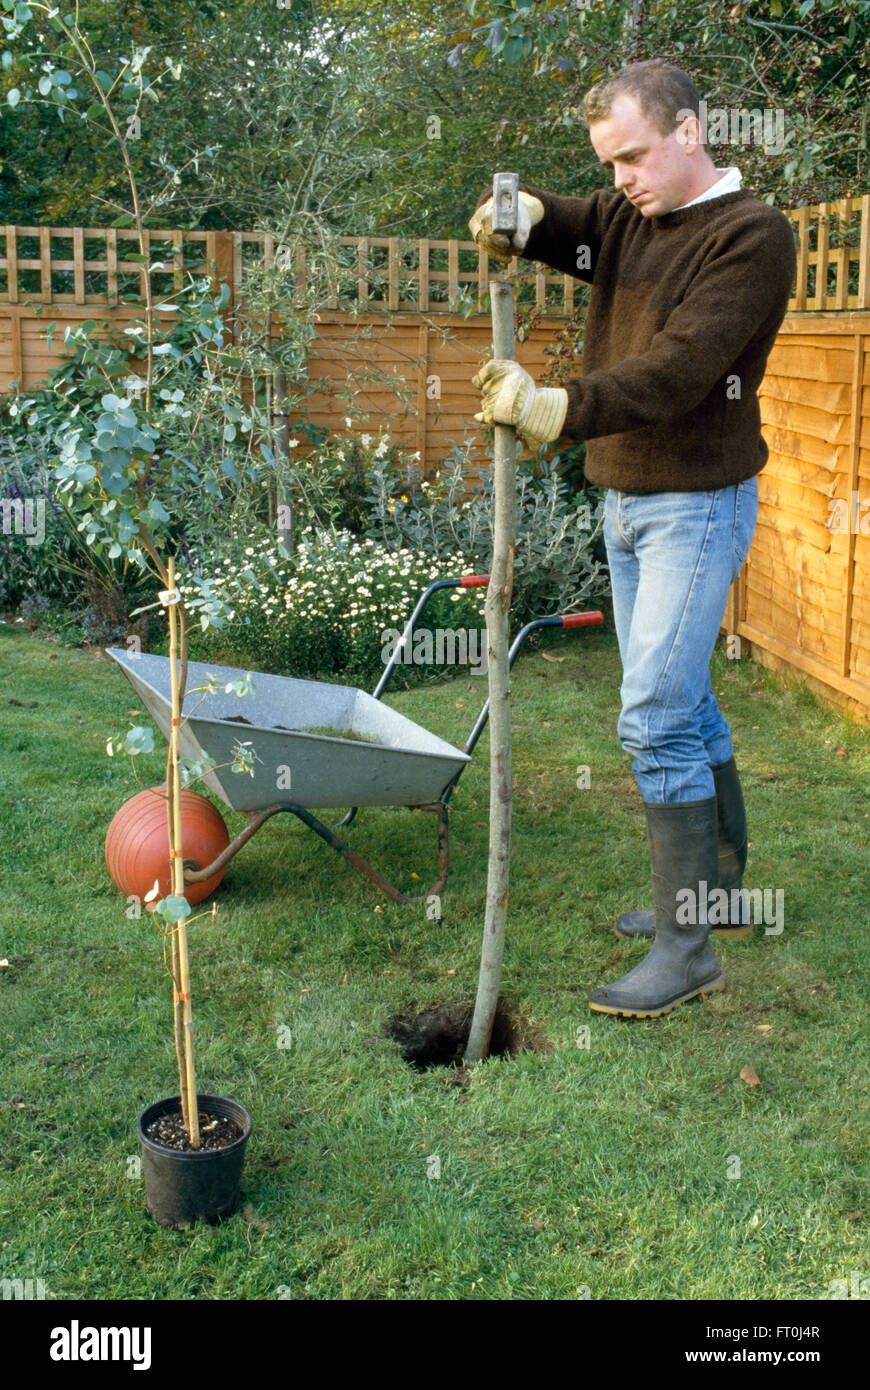 Gardener hammering a wooden stake in lawn before planting a small tree FOR EDITORIAL USE ONLY Stock Photo